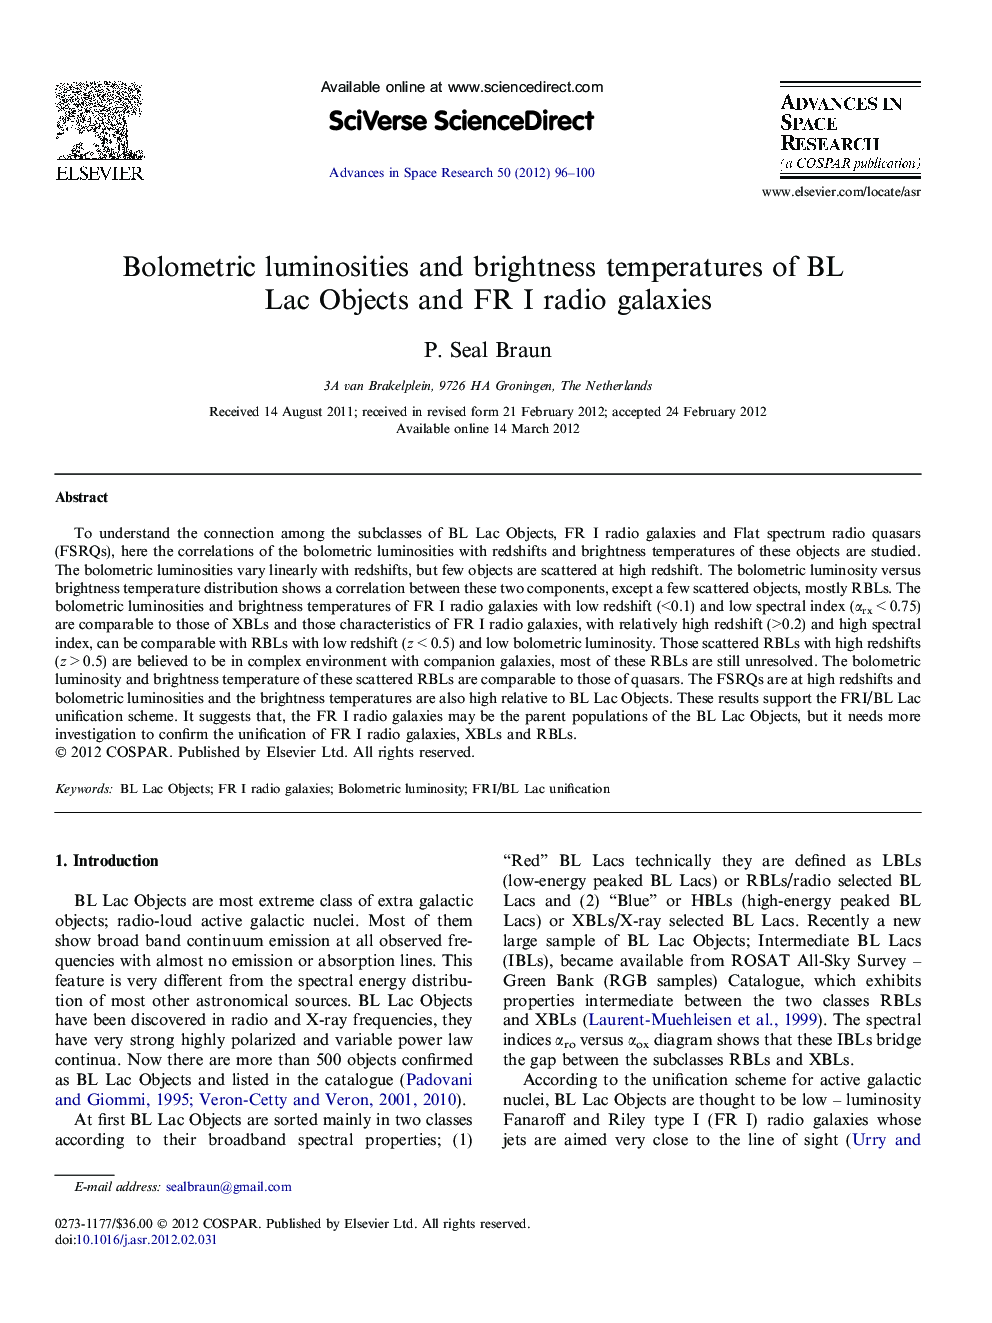 Bolometric luminosities and brightness temperatures of BL Lac Objects and FR I radio galaxies